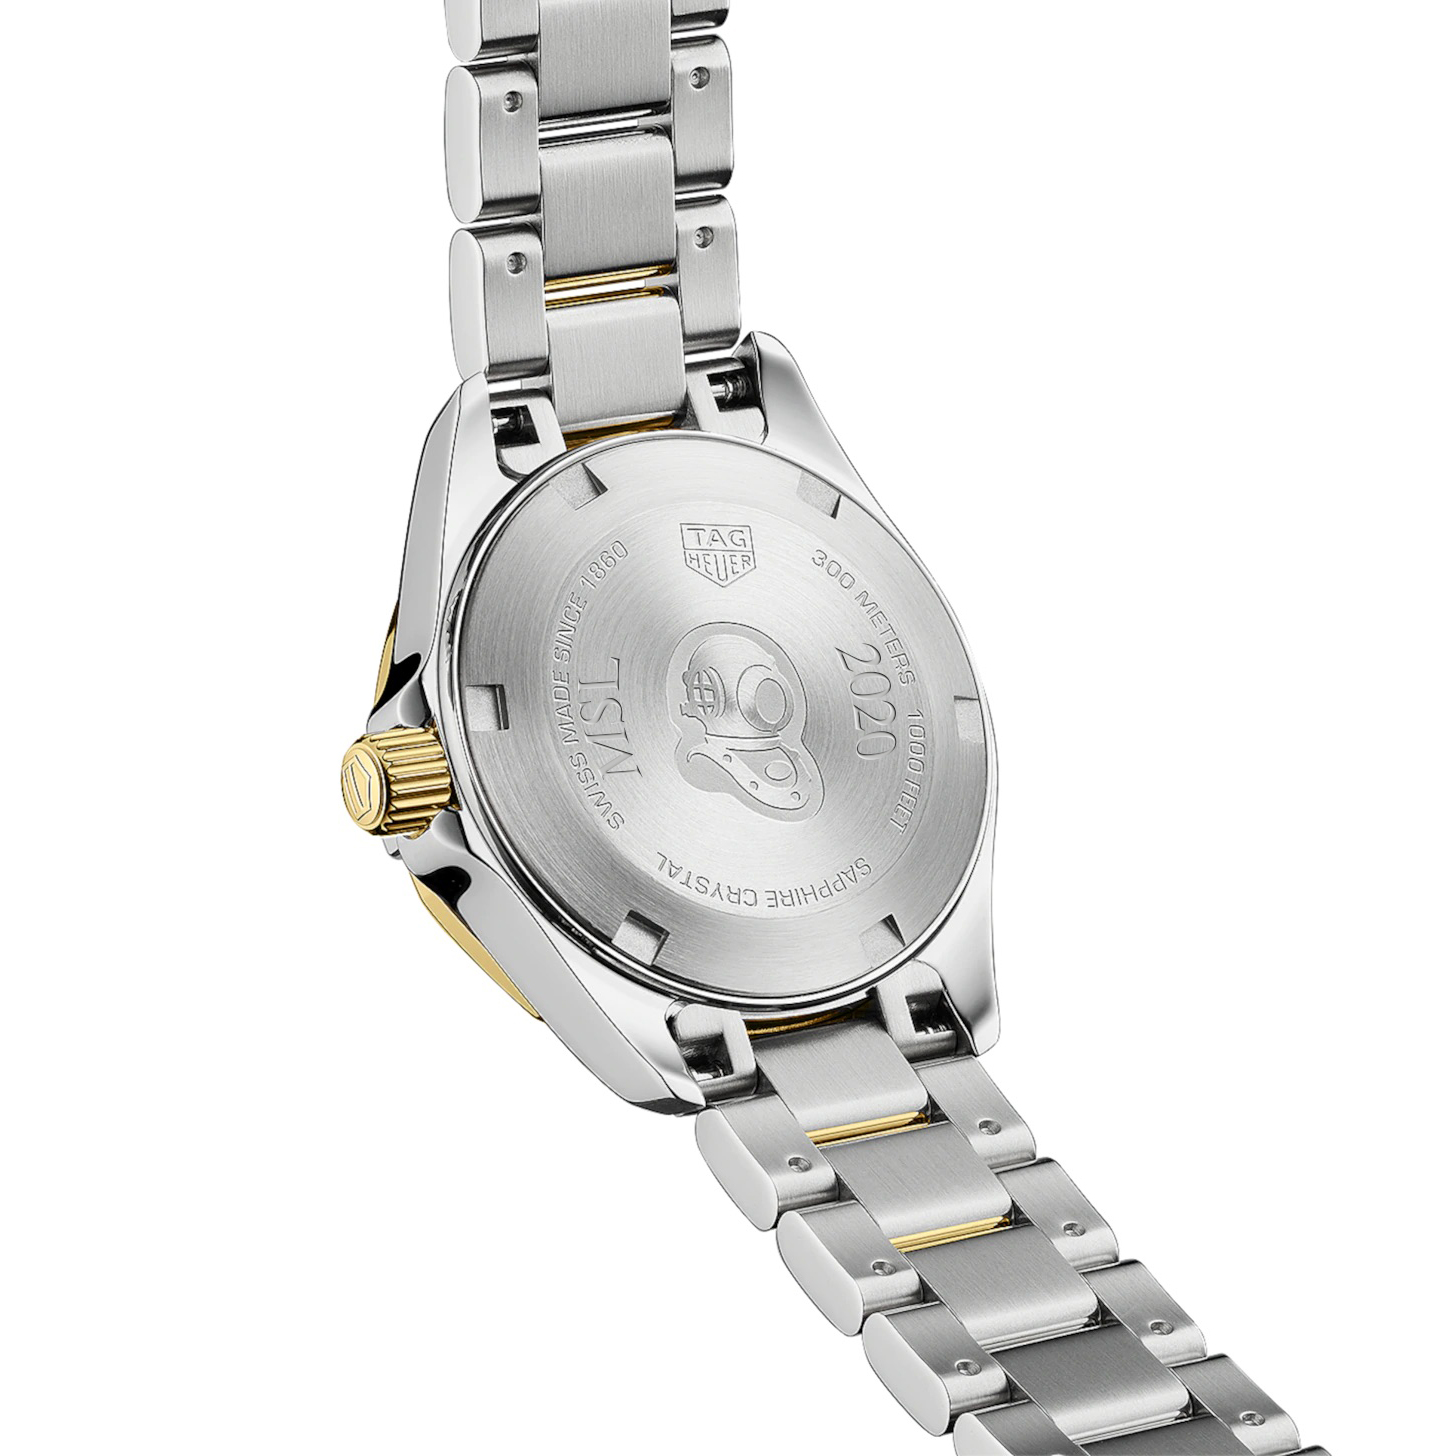 University of Southern California TAG Heuer Two-Tone Aquaracer for Women - Image 3